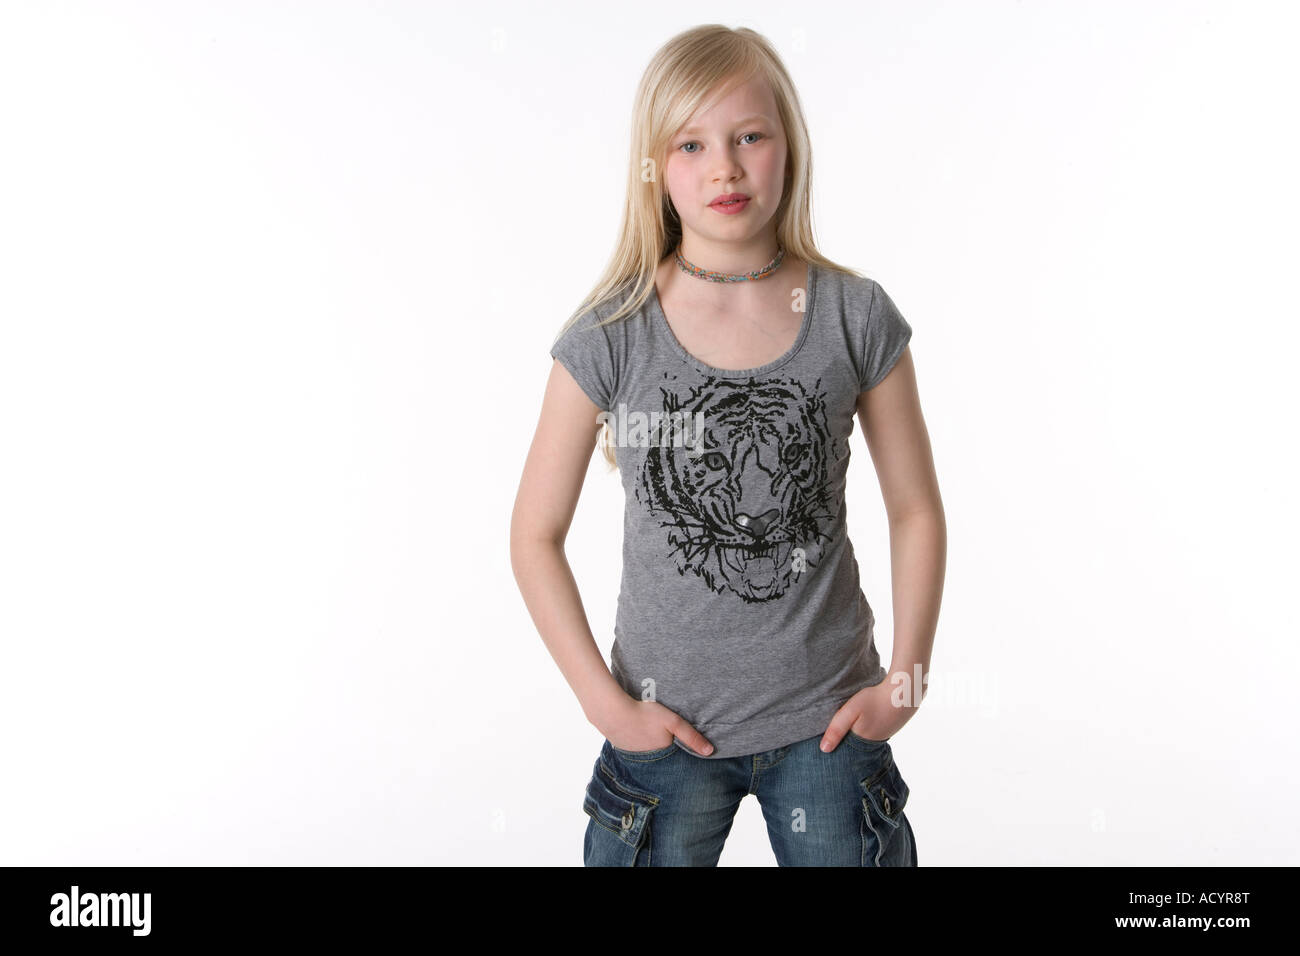 Portrait of a blond teenage girl Stock Photo